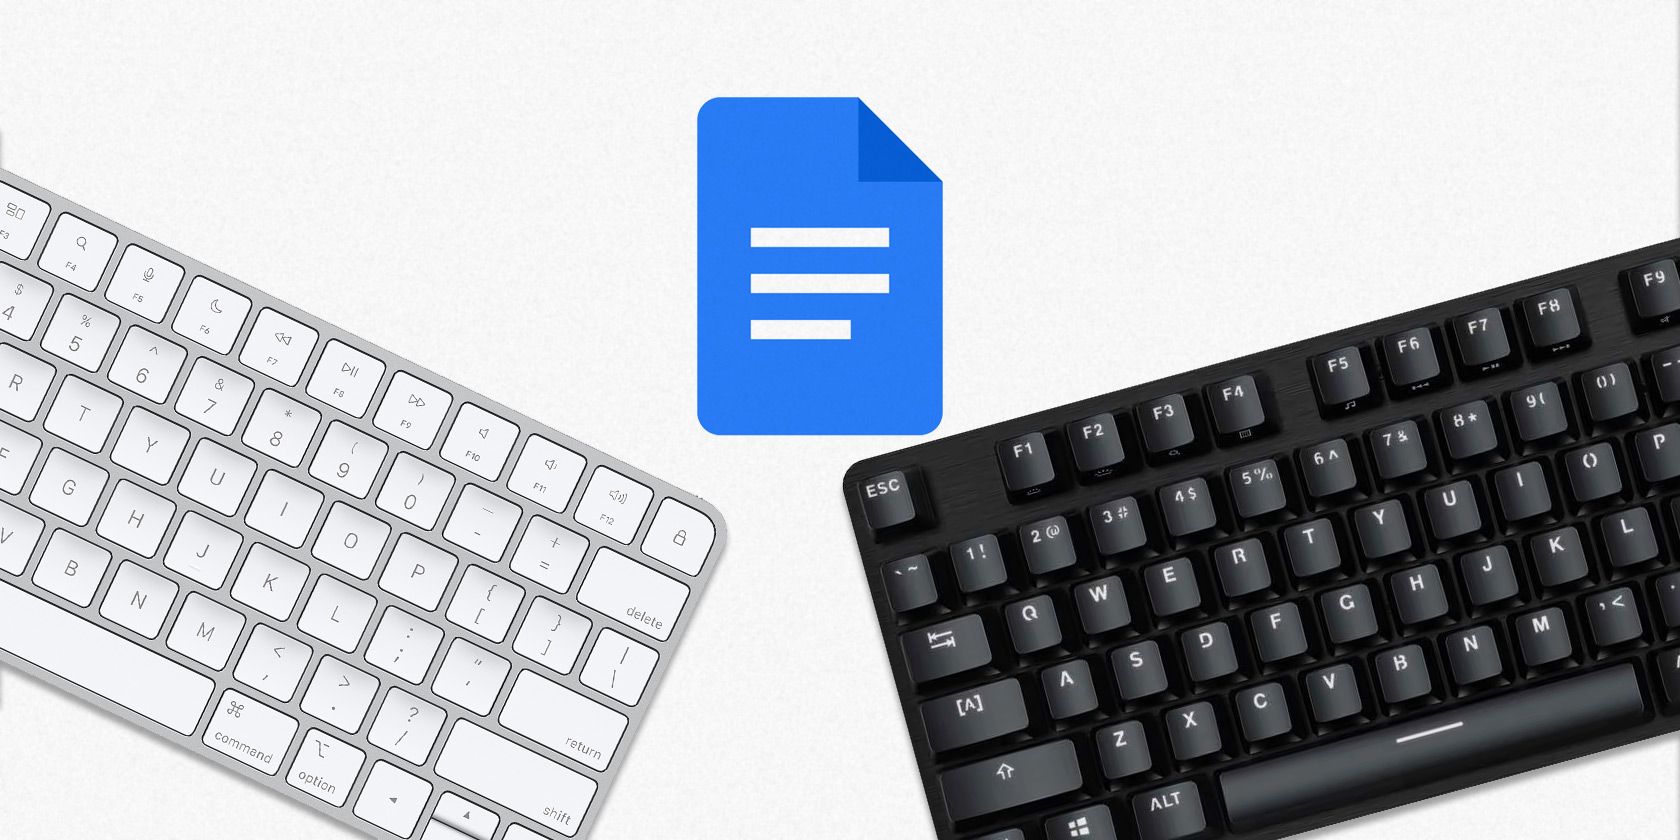 Mac and PC keyboards with Google Docs logo above